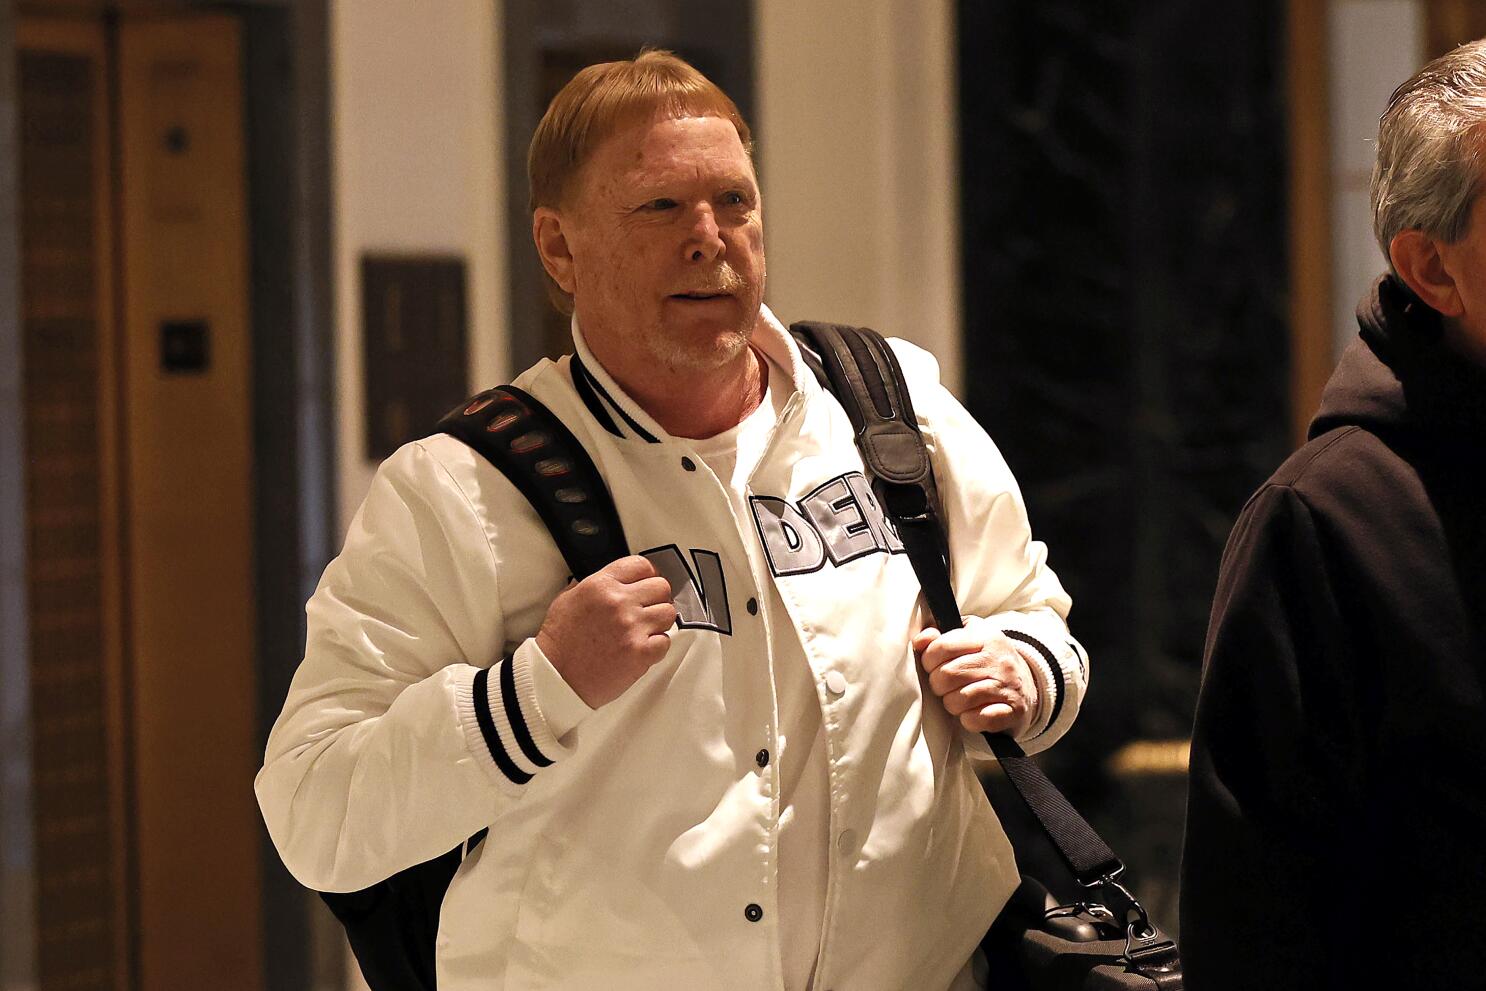 Mark Davis, Raiders owner, seen dining in at In-N-Out